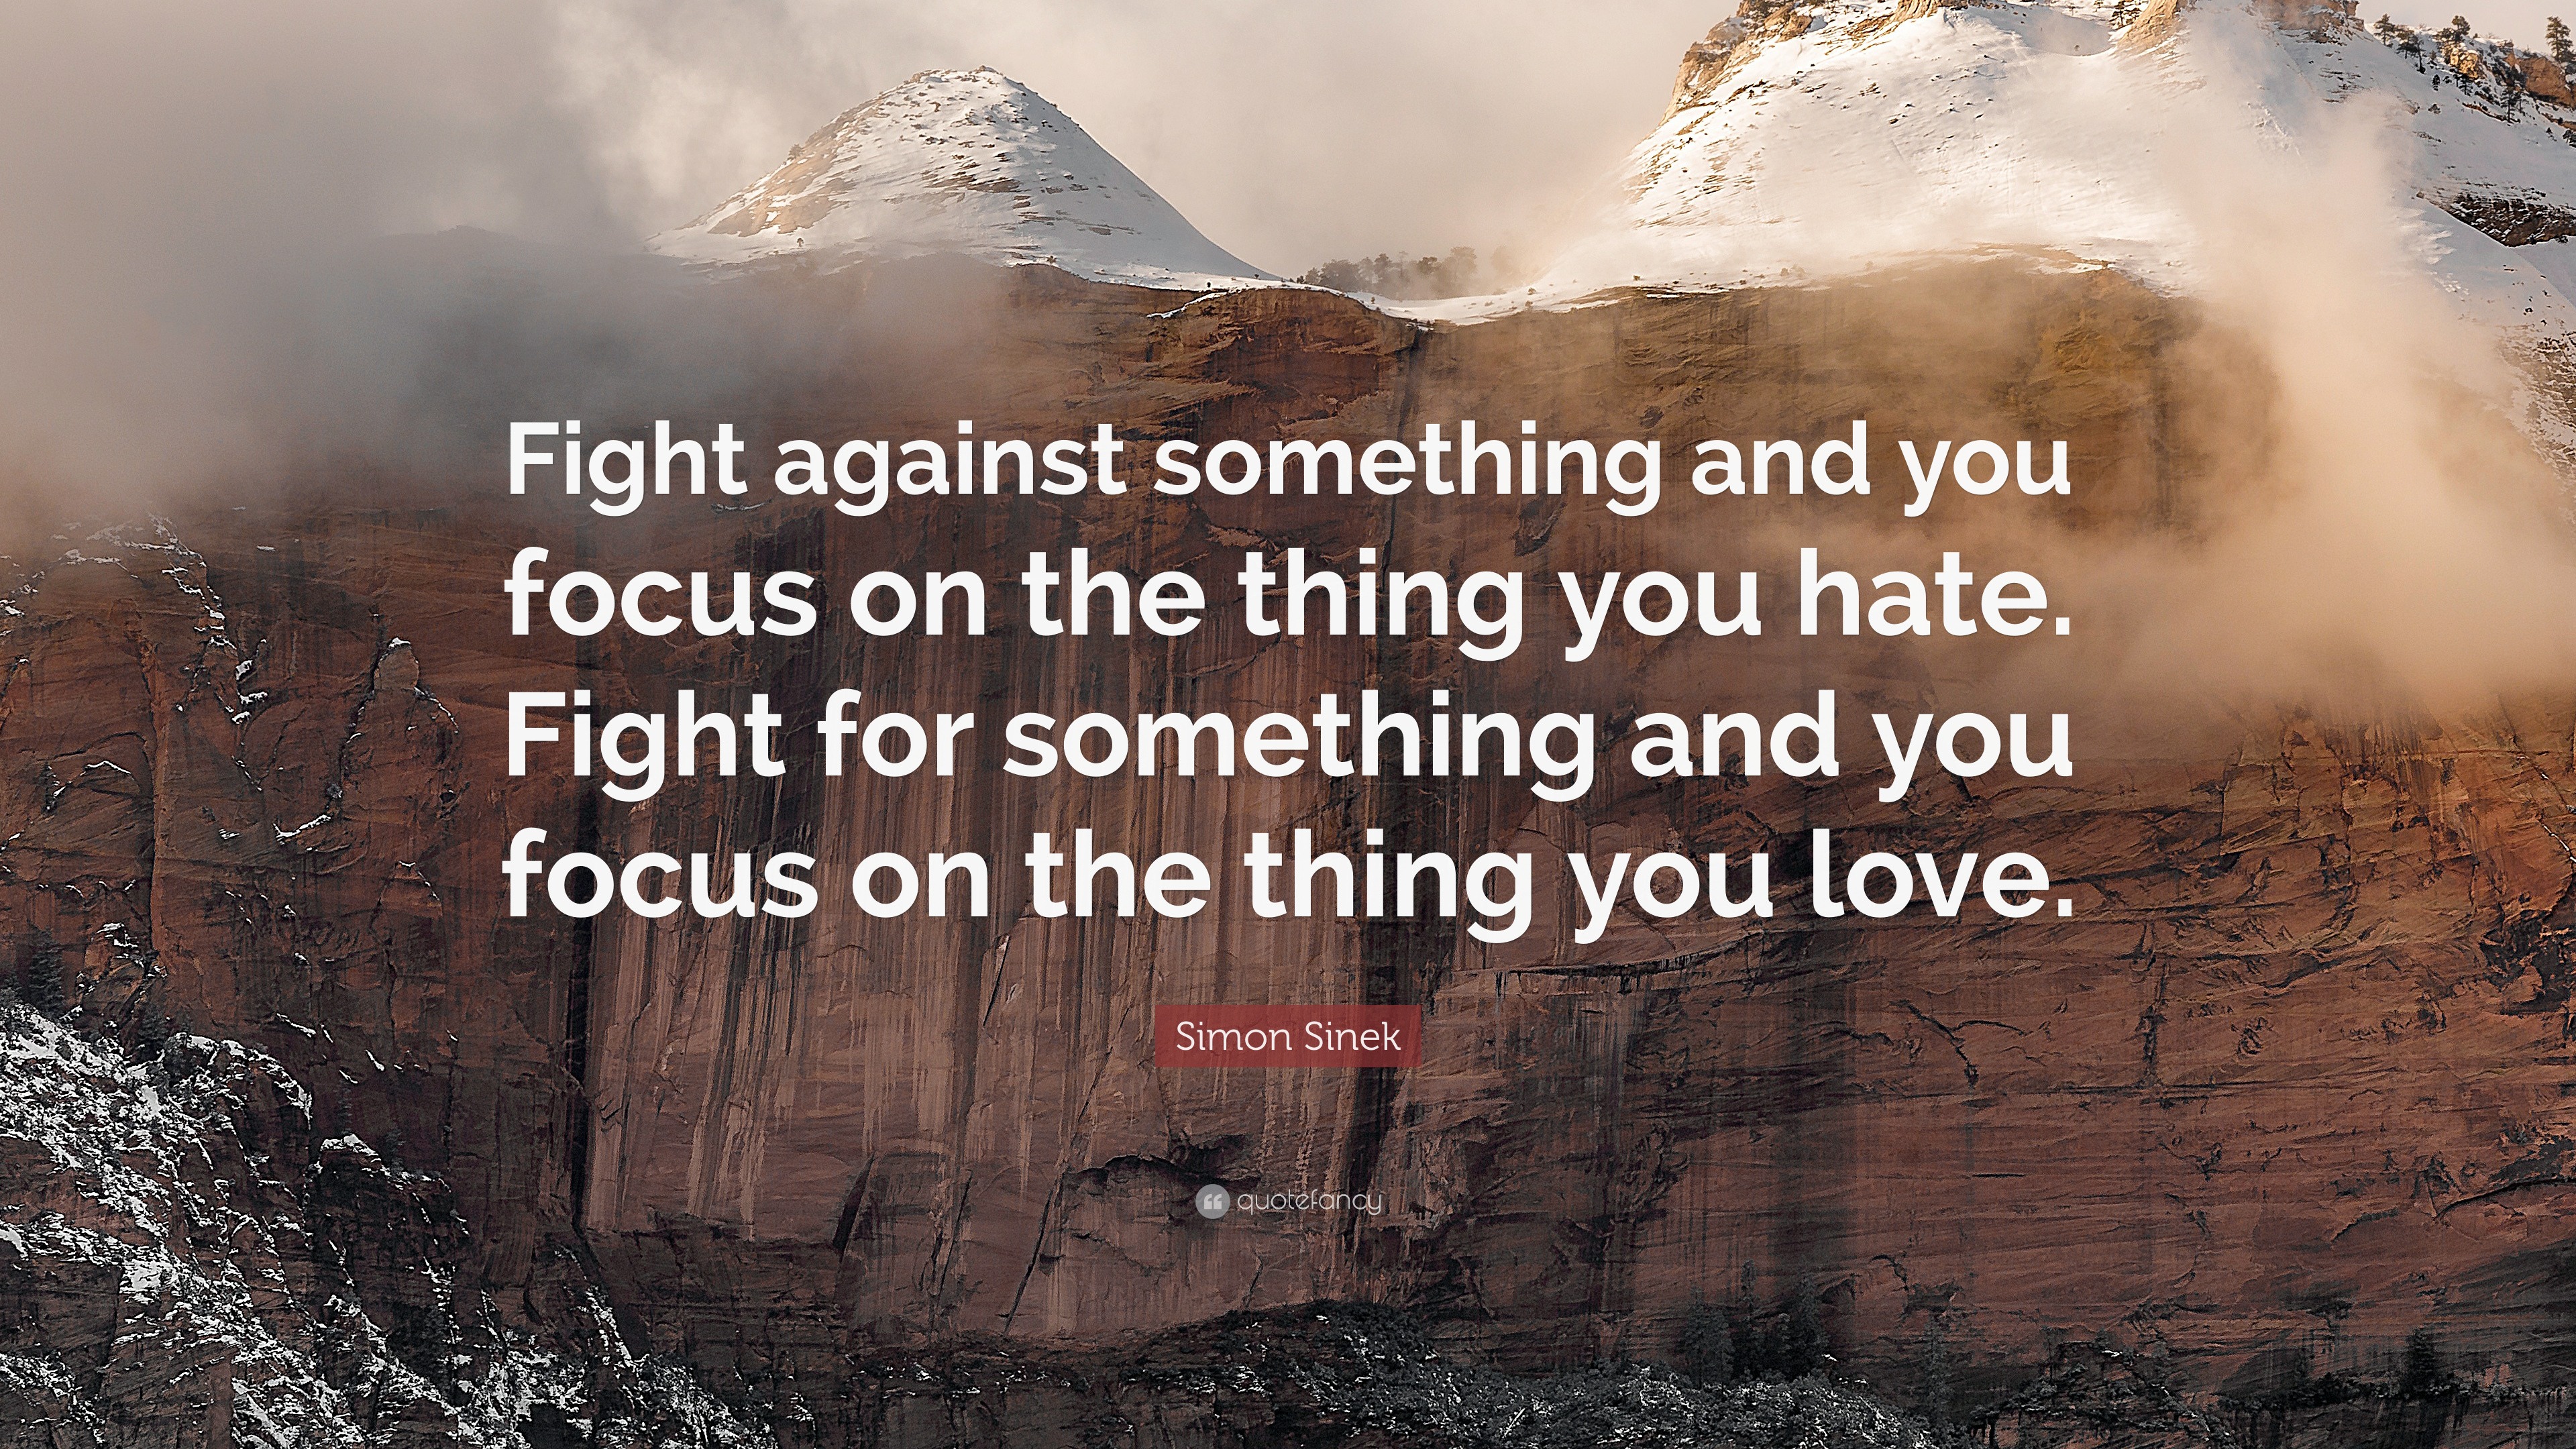 Simon Sinek Quote “Fight against something and you focus on the thing you hate